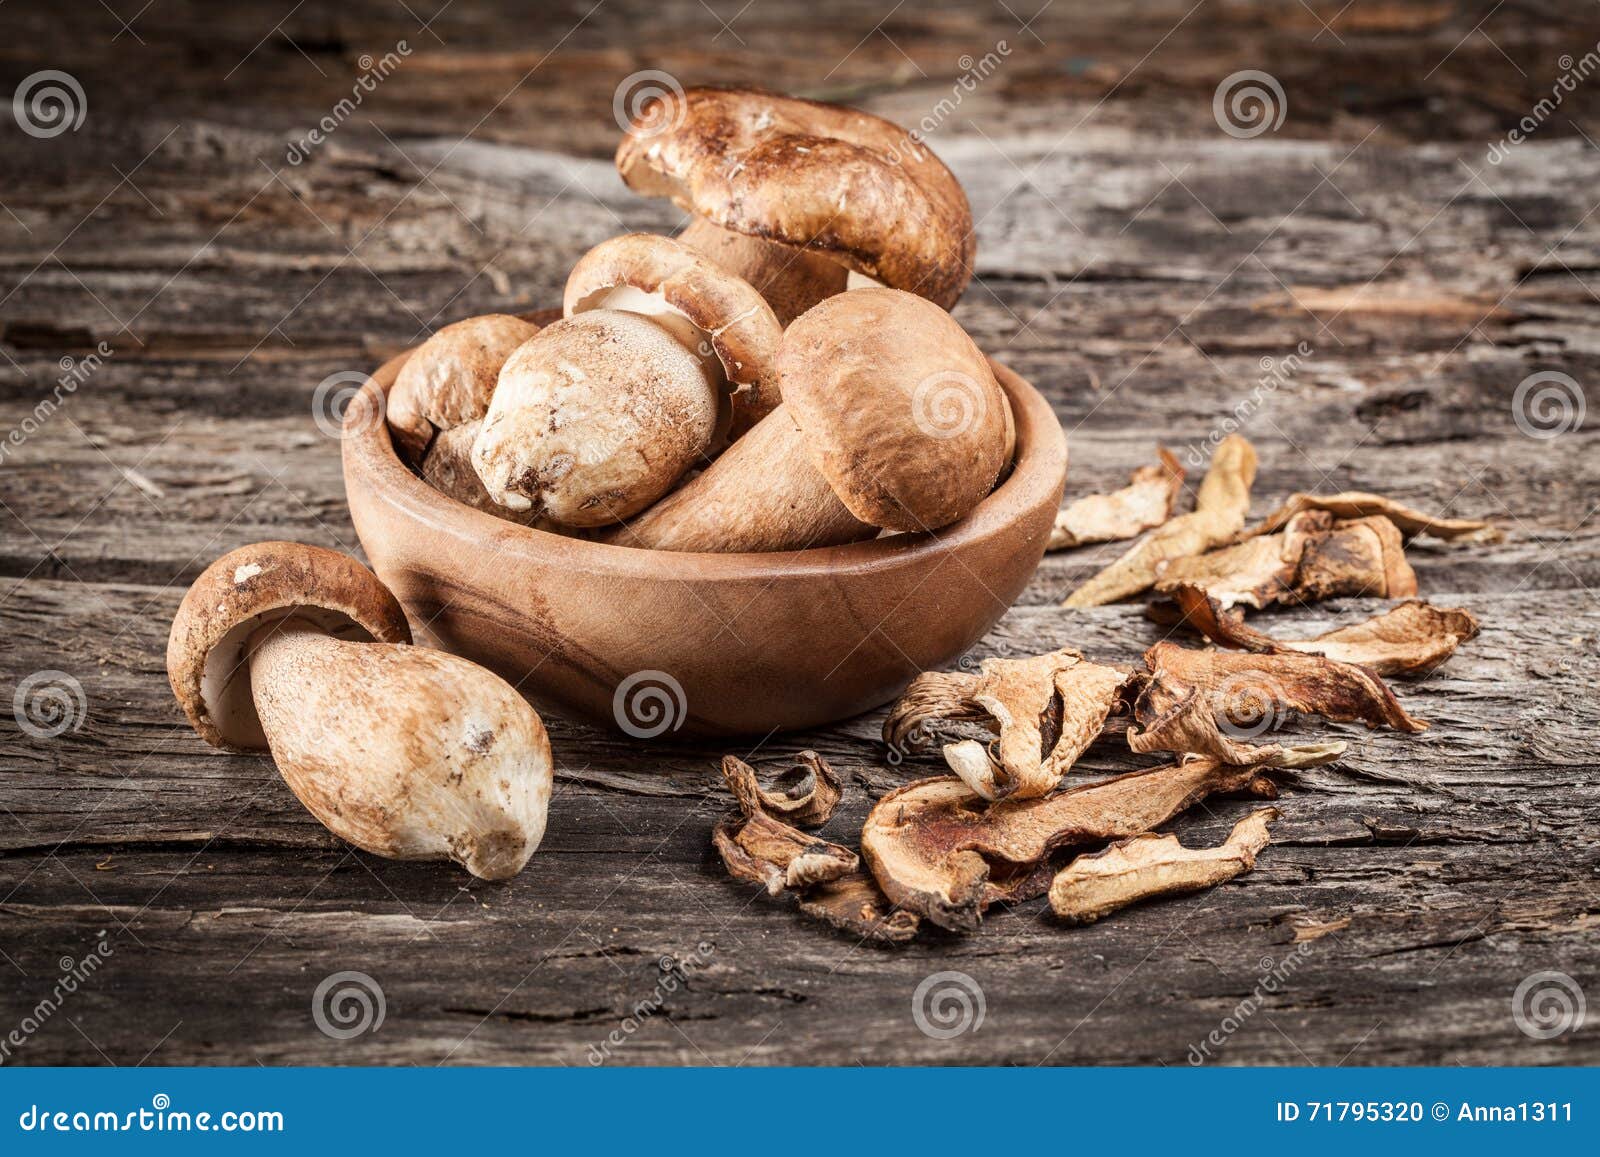 fresh and dry organic ceps on a wooden background